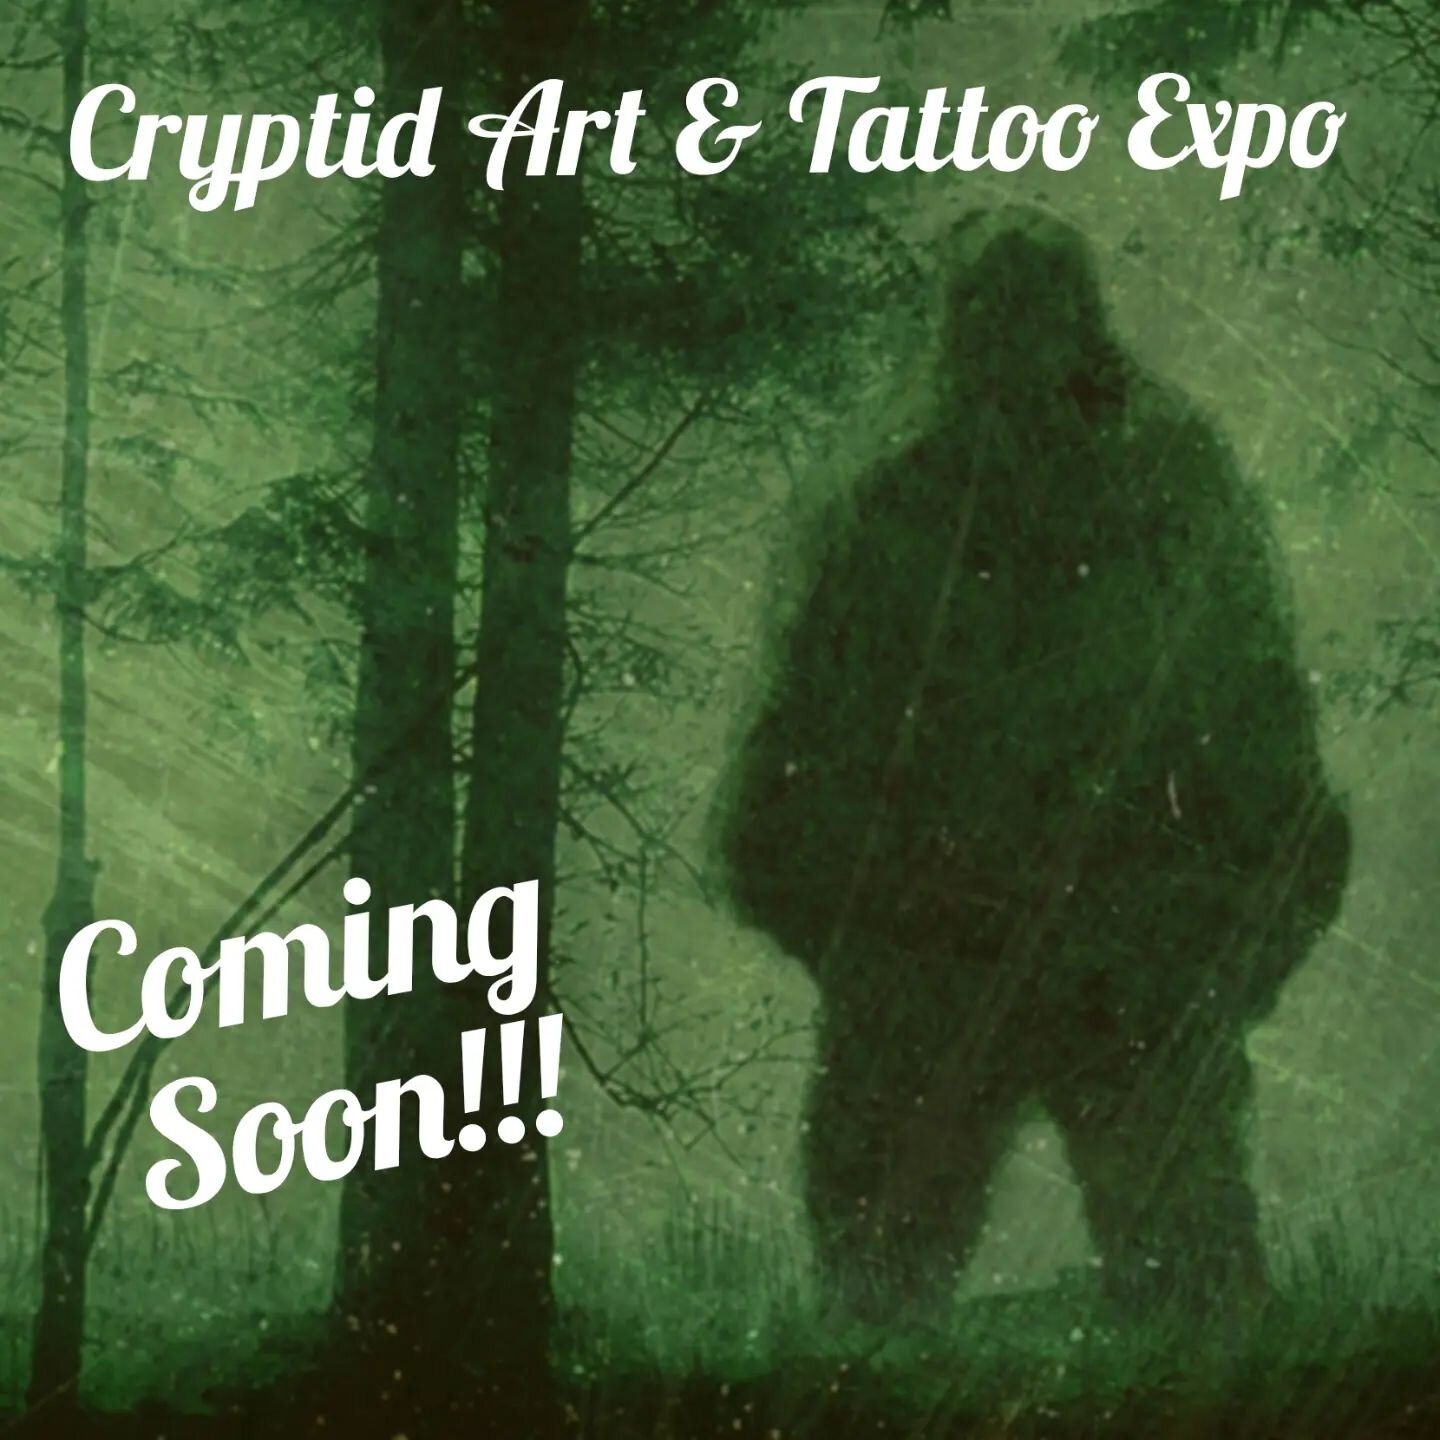 Cryptid Art and Tattoo Expo is coming to Puyallup, WA soon! 
An art and tattoo expo to focus on performance art, oddities and curiosities, and tattoo arts!